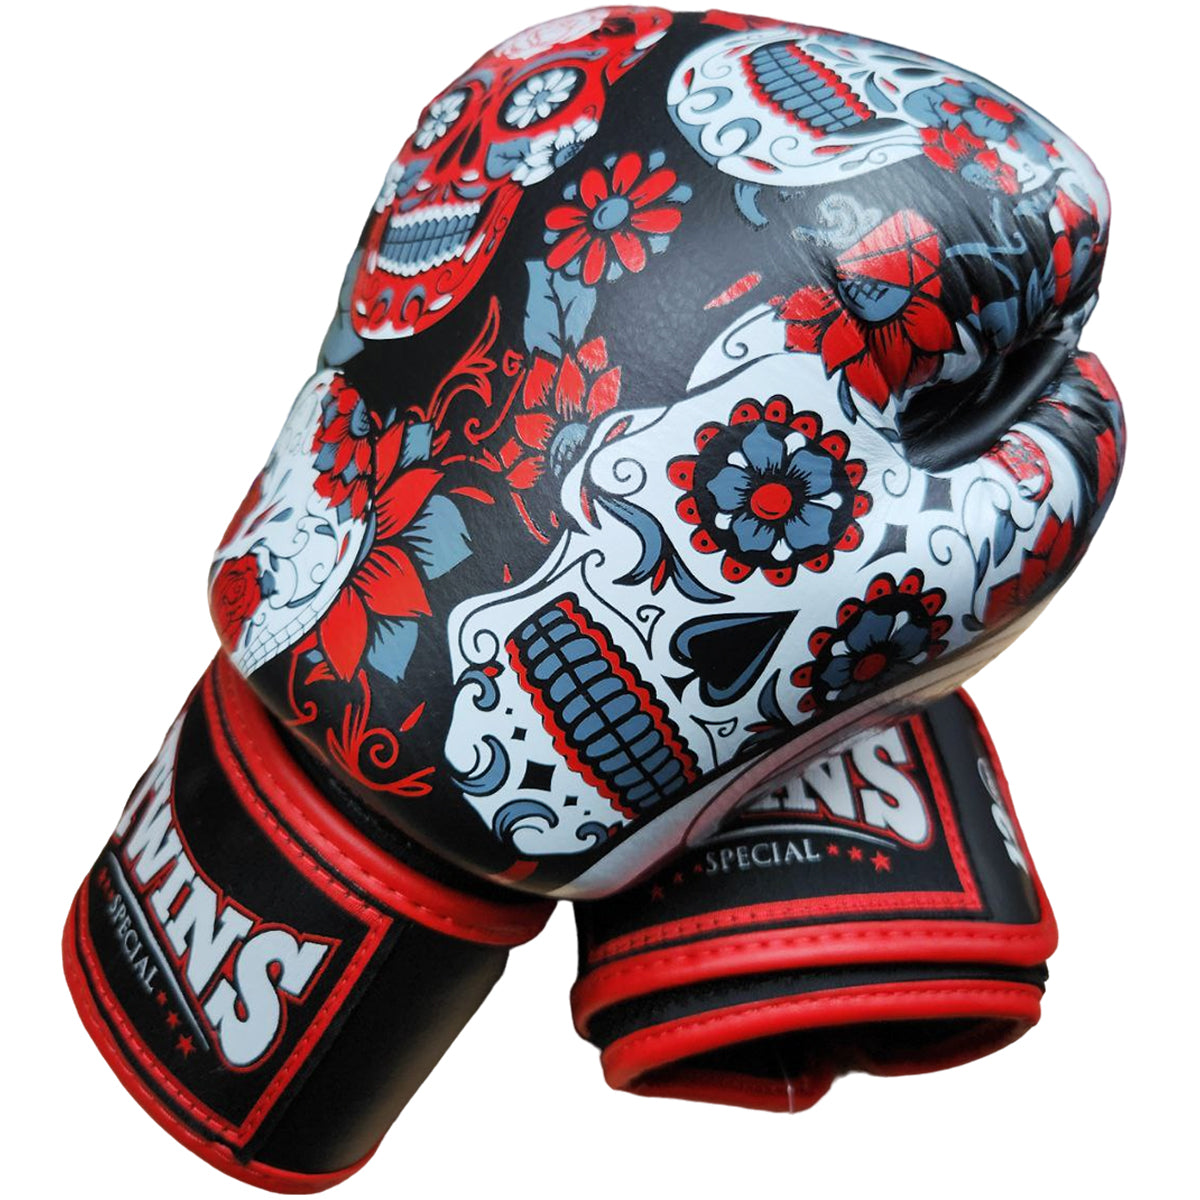 Boxing Gloves Twins Special FBGV-53 Red Fancy